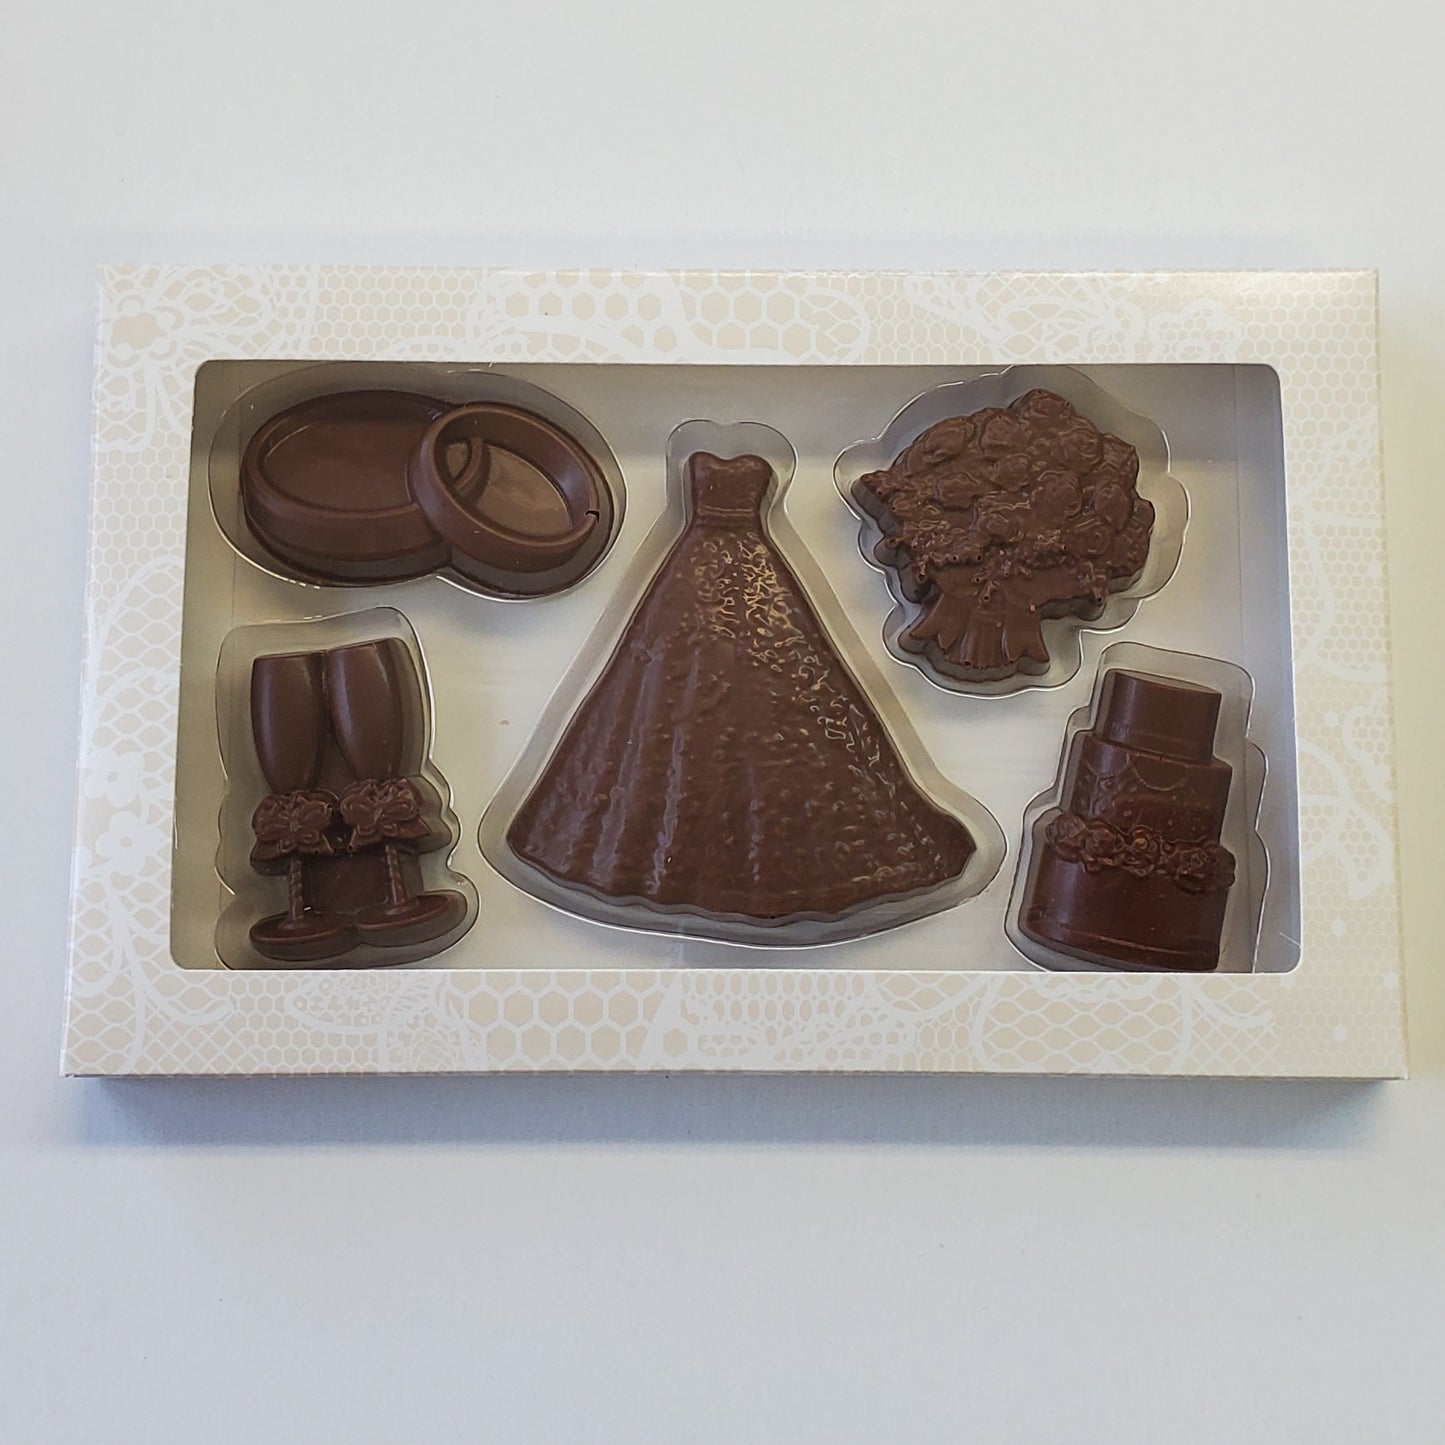 Milk Chocolate Wedding Box Set includes chocolate rings, champagne flutes, wedding dress, flowers and cake shapes